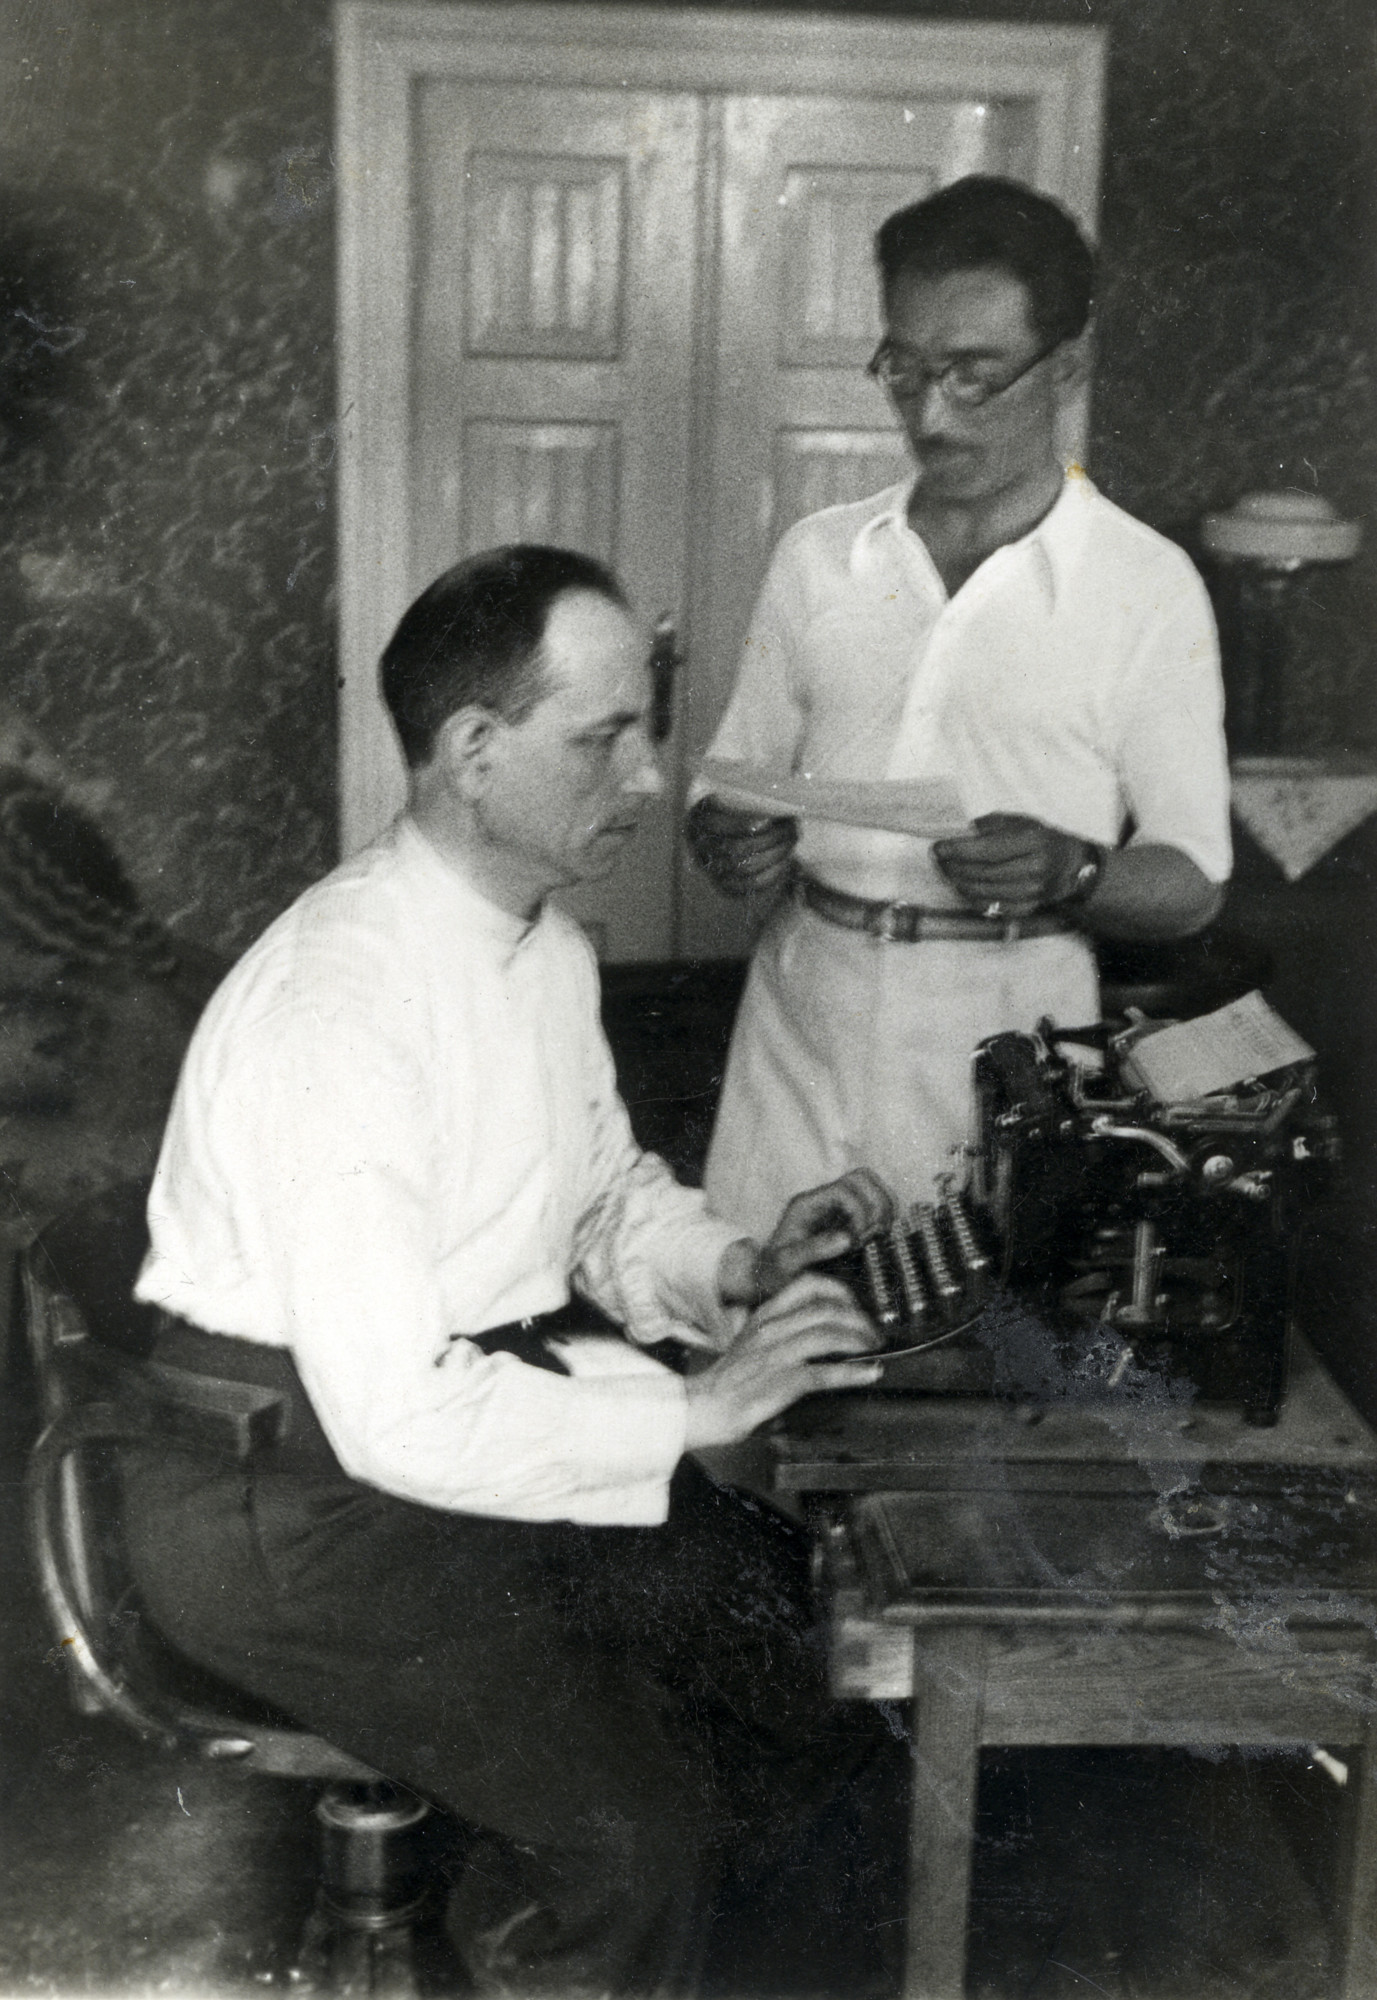 Moshe Alterman works in the office of his furniture factory, standing next to  his accountant seated at the typewriter.